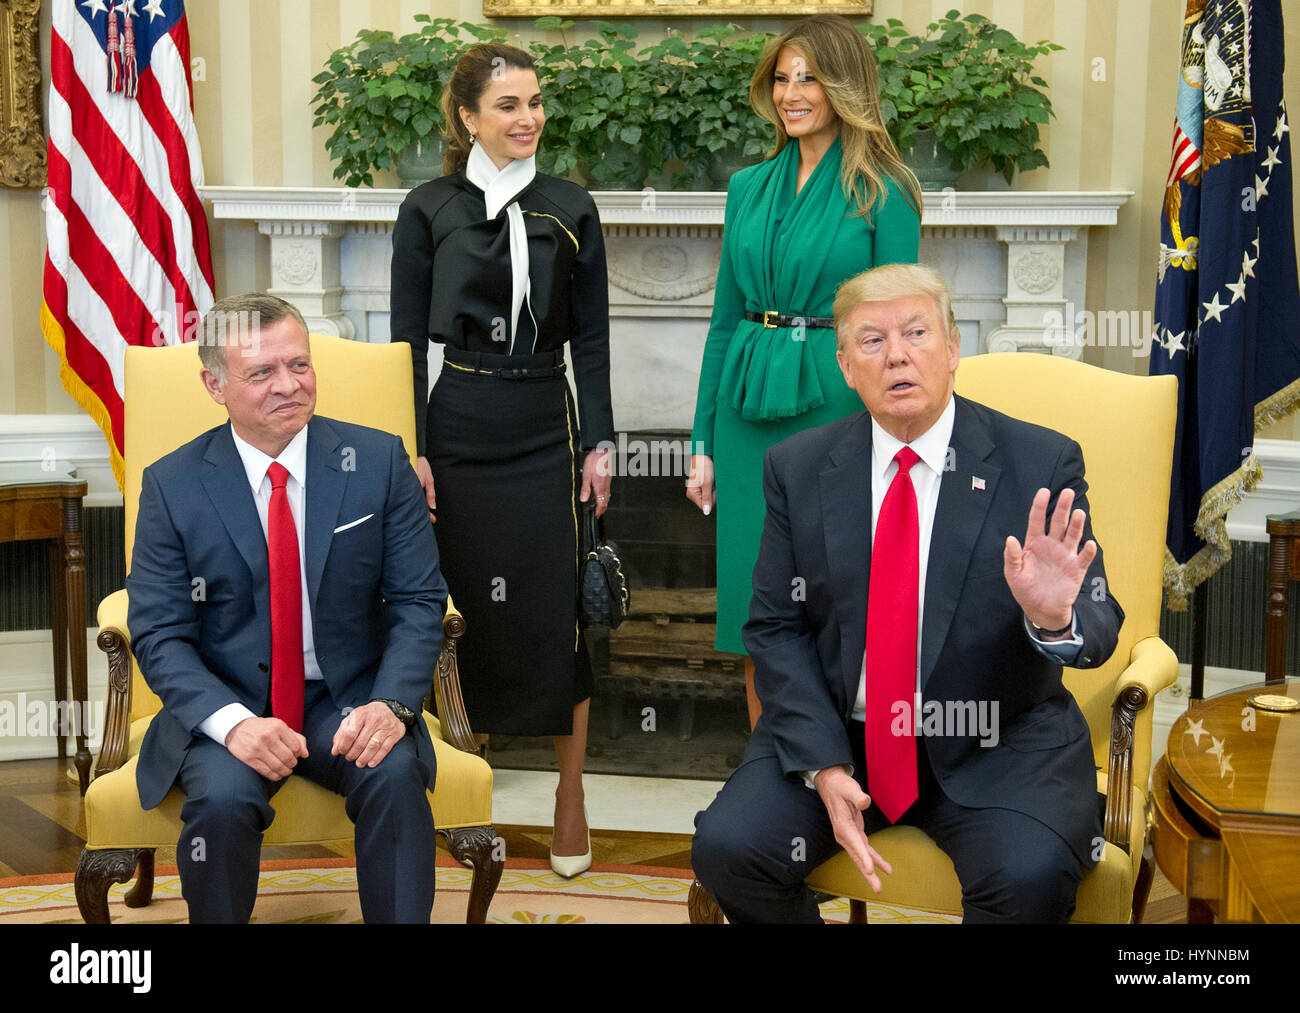 Washington, USA. 5th Apr, 2017. Washington DC, USA. 5th April, 2017. United States President Donald J. Trump asks for the press to stay as he makes a statement on Syria as he meets King Abdullah II of Jordan in the Oval Office of the White House in Washington, DC on Wednesday, April 5, 2017. Standing behind the President and King are Queen Rania of Jordan, left, and first lady Melania Trump, right. Credit: MediaPunch Inc/Alamy Live News Stock Photo